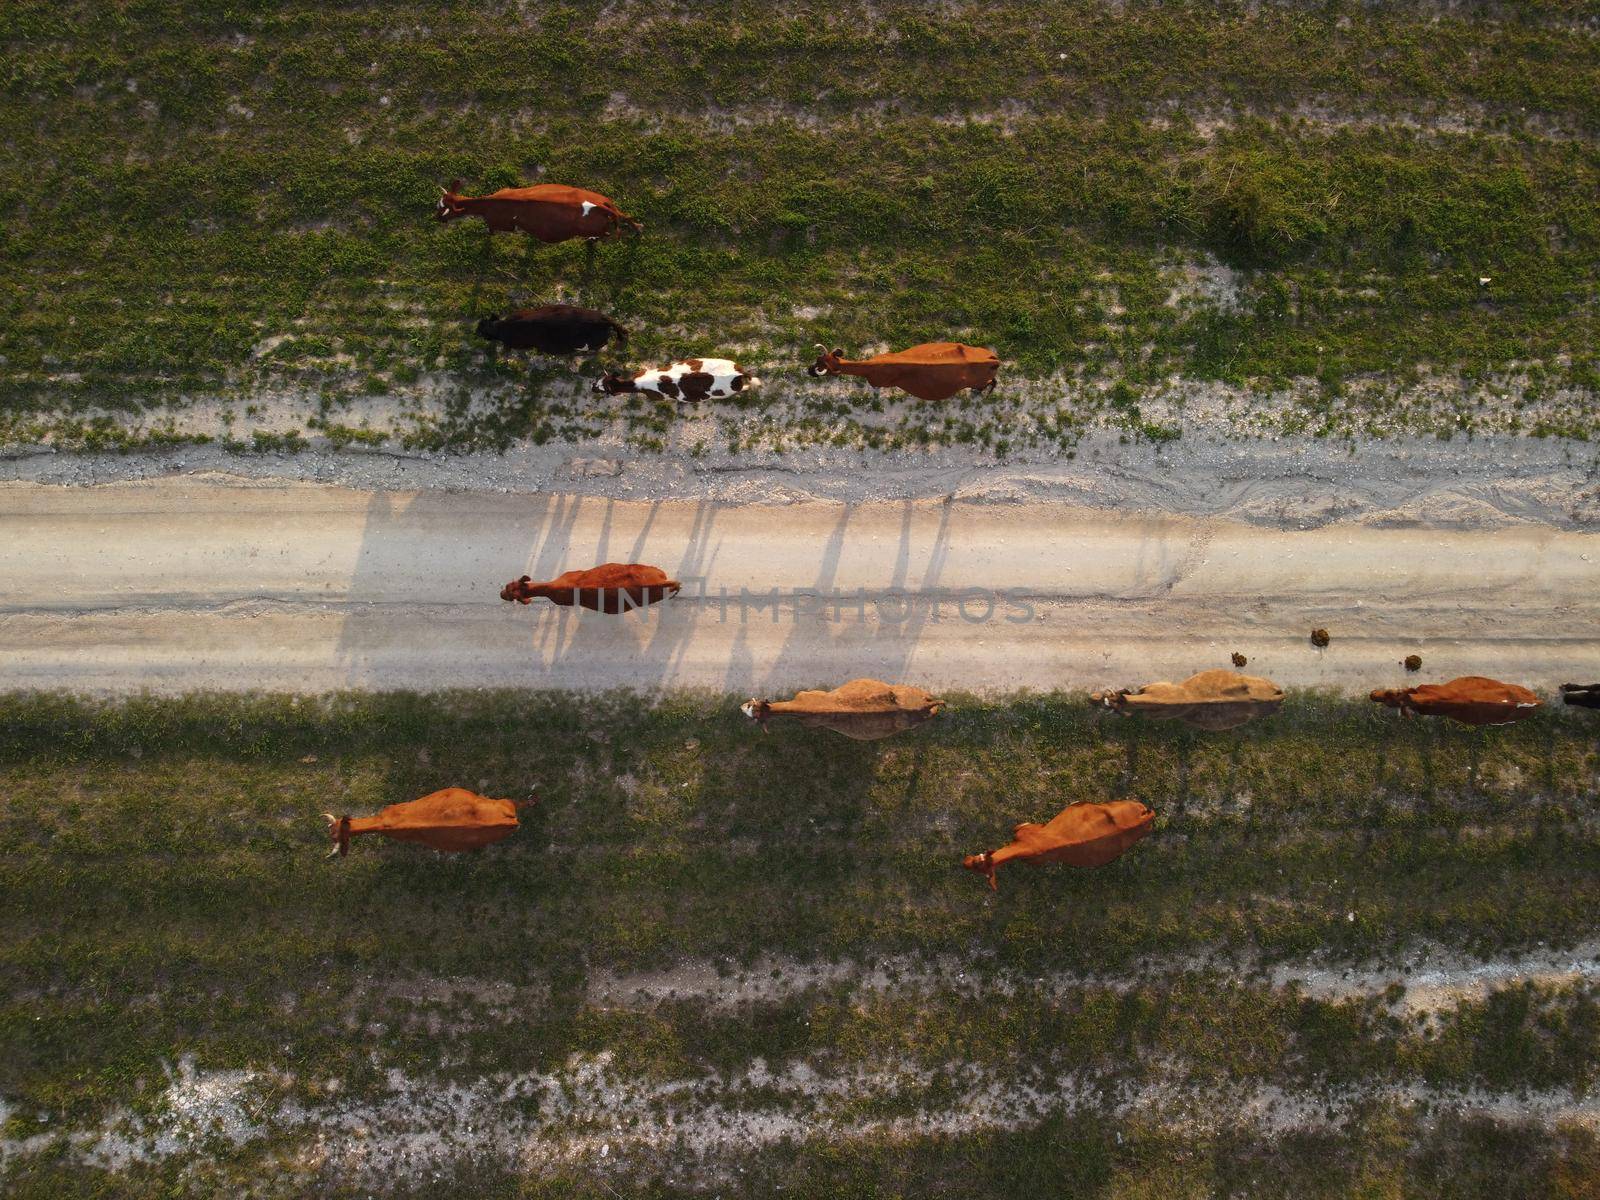 AERIAL: Flying over a small herd of cattle cows walking uniformly down farm road on the hill. Black, brown and spotted cows. Top down view of the countryside on a sping sunset. Idyllic rural landscape by panophotograph